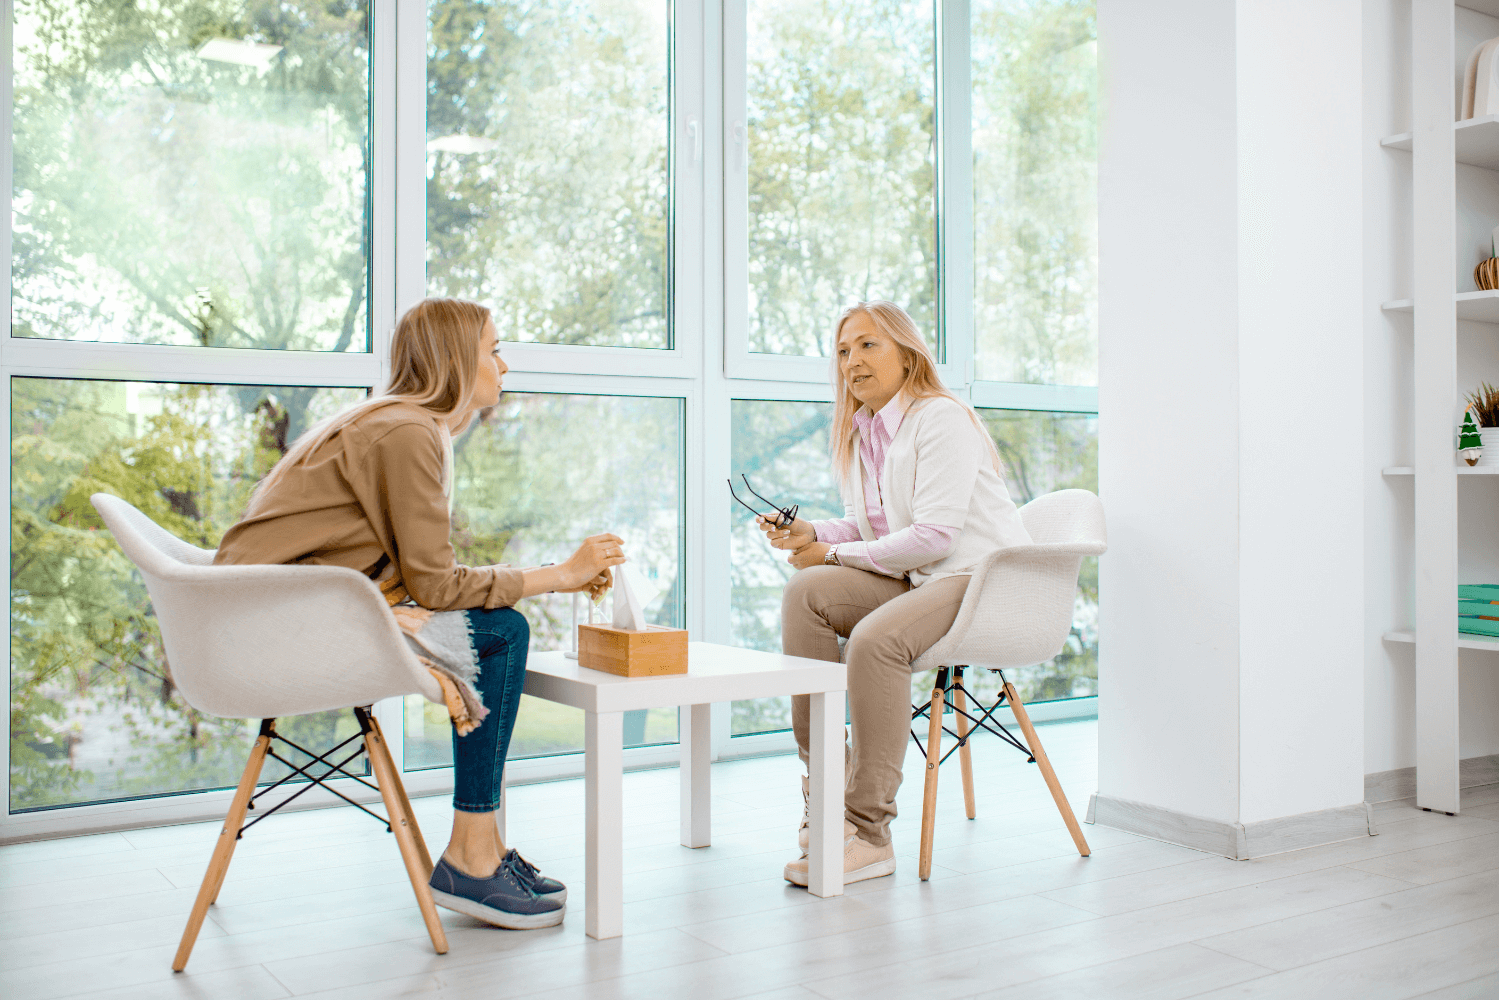 Woman sitting across from a counselor during a counseling session